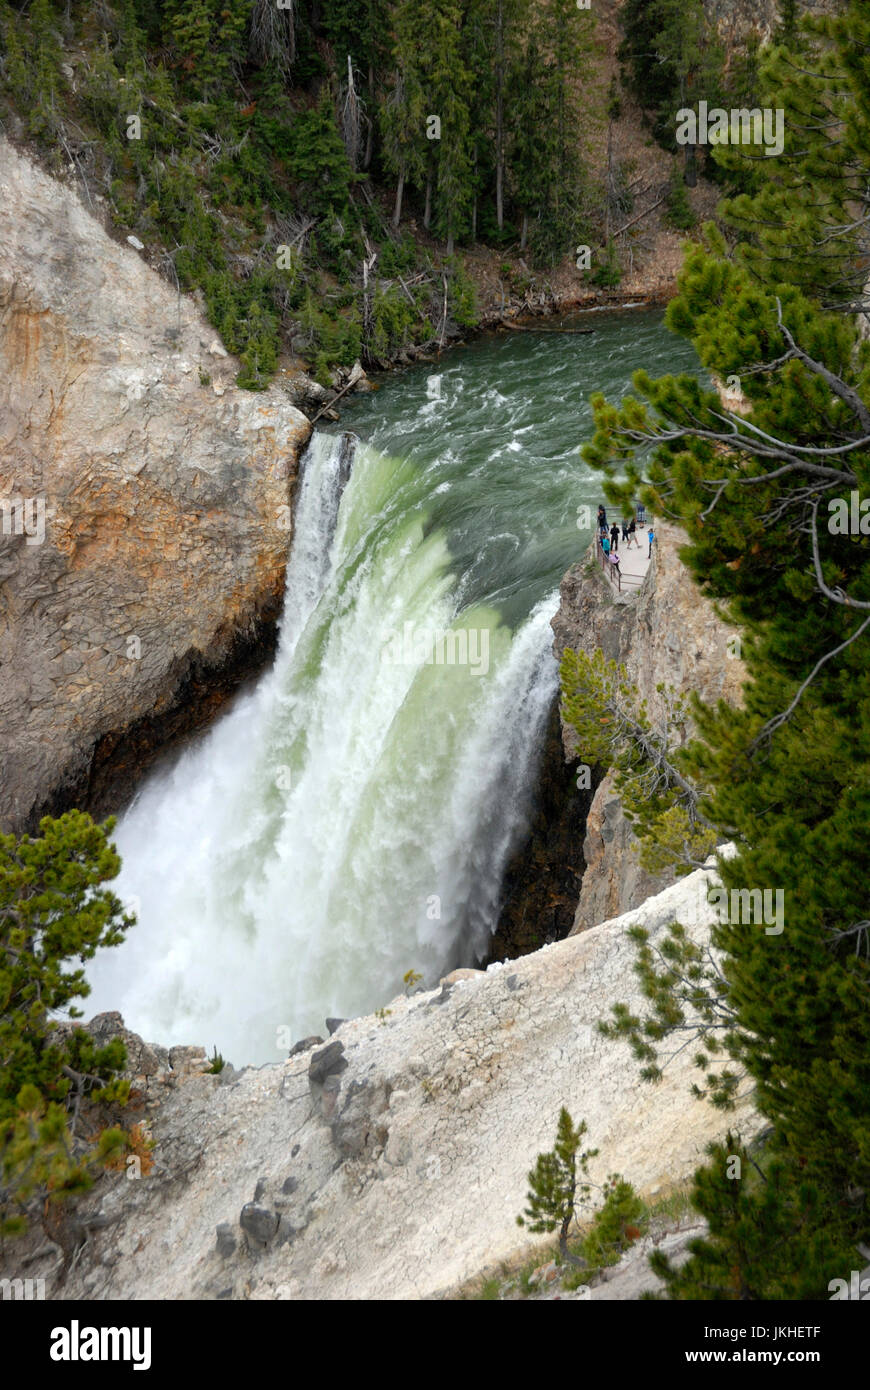 Lower Falls from above, Yellowstone National Park, Wyoming, USA Stock Photo